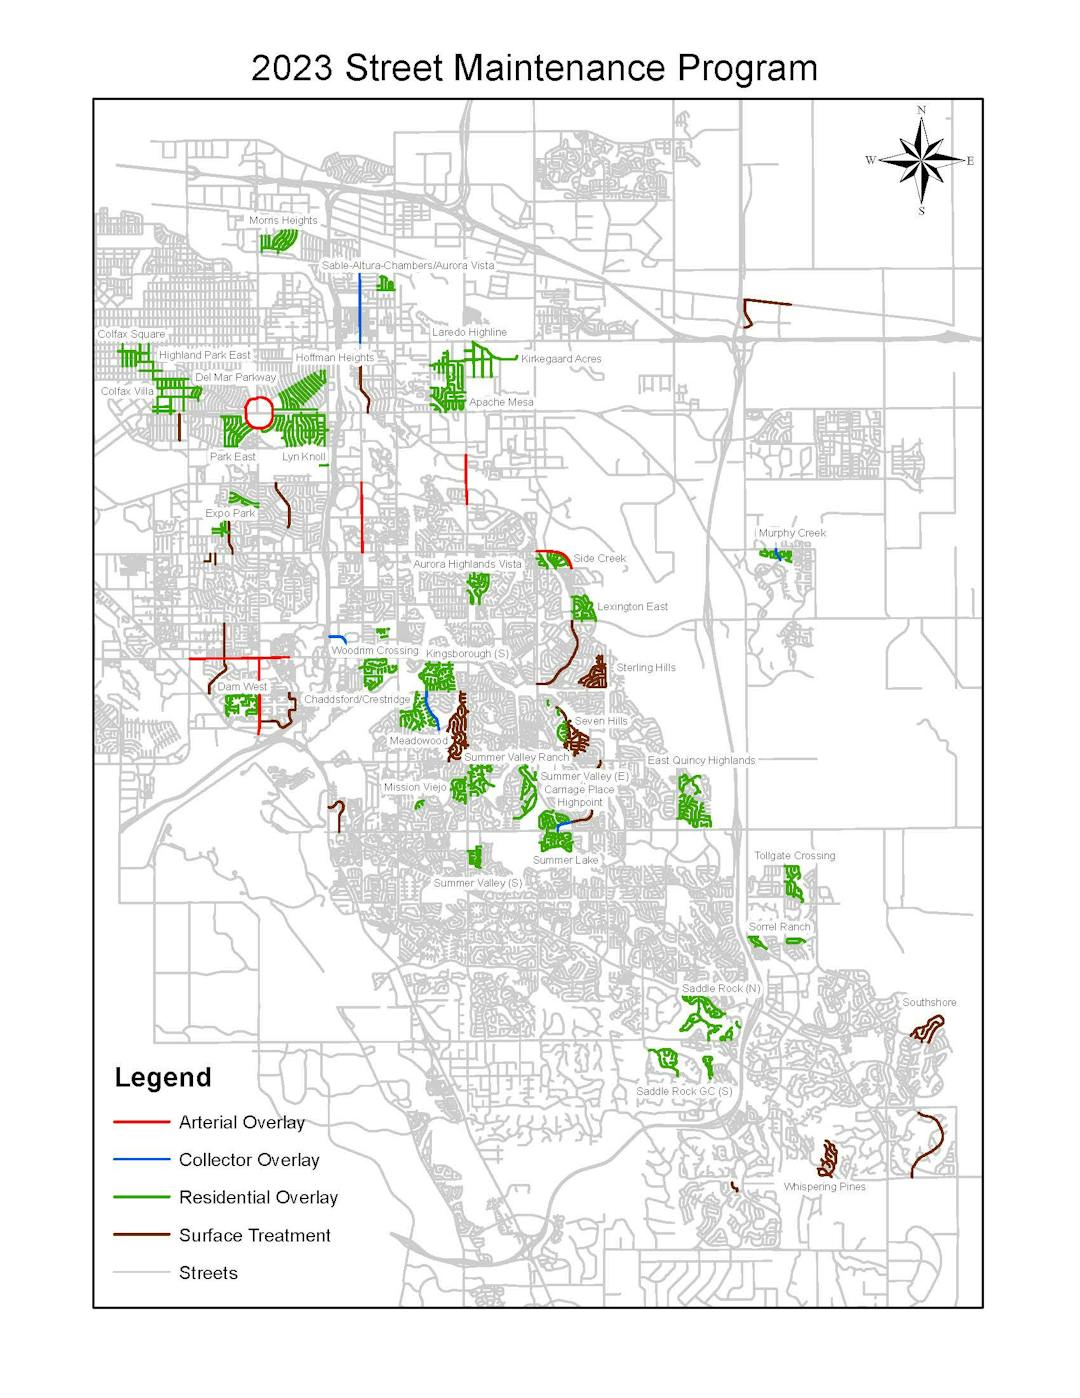 Image of Aurora map showing neighborhoods targeted for street maintenance in 2023